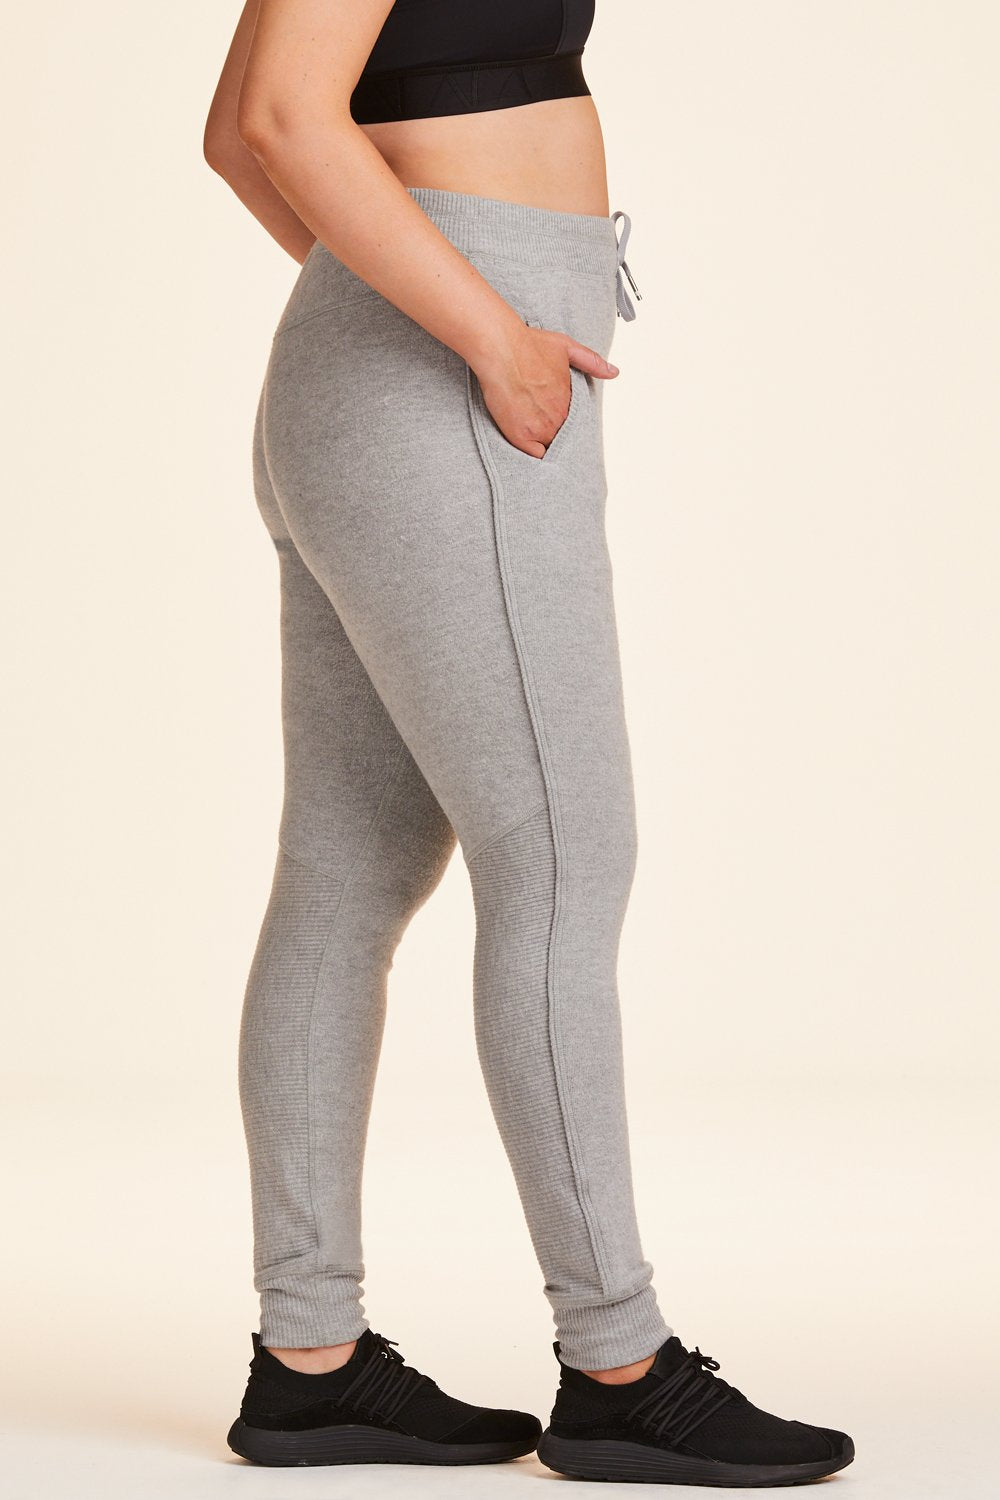 Side view of Alala Women's Luxury Athleisure super-soft grey sweatpant